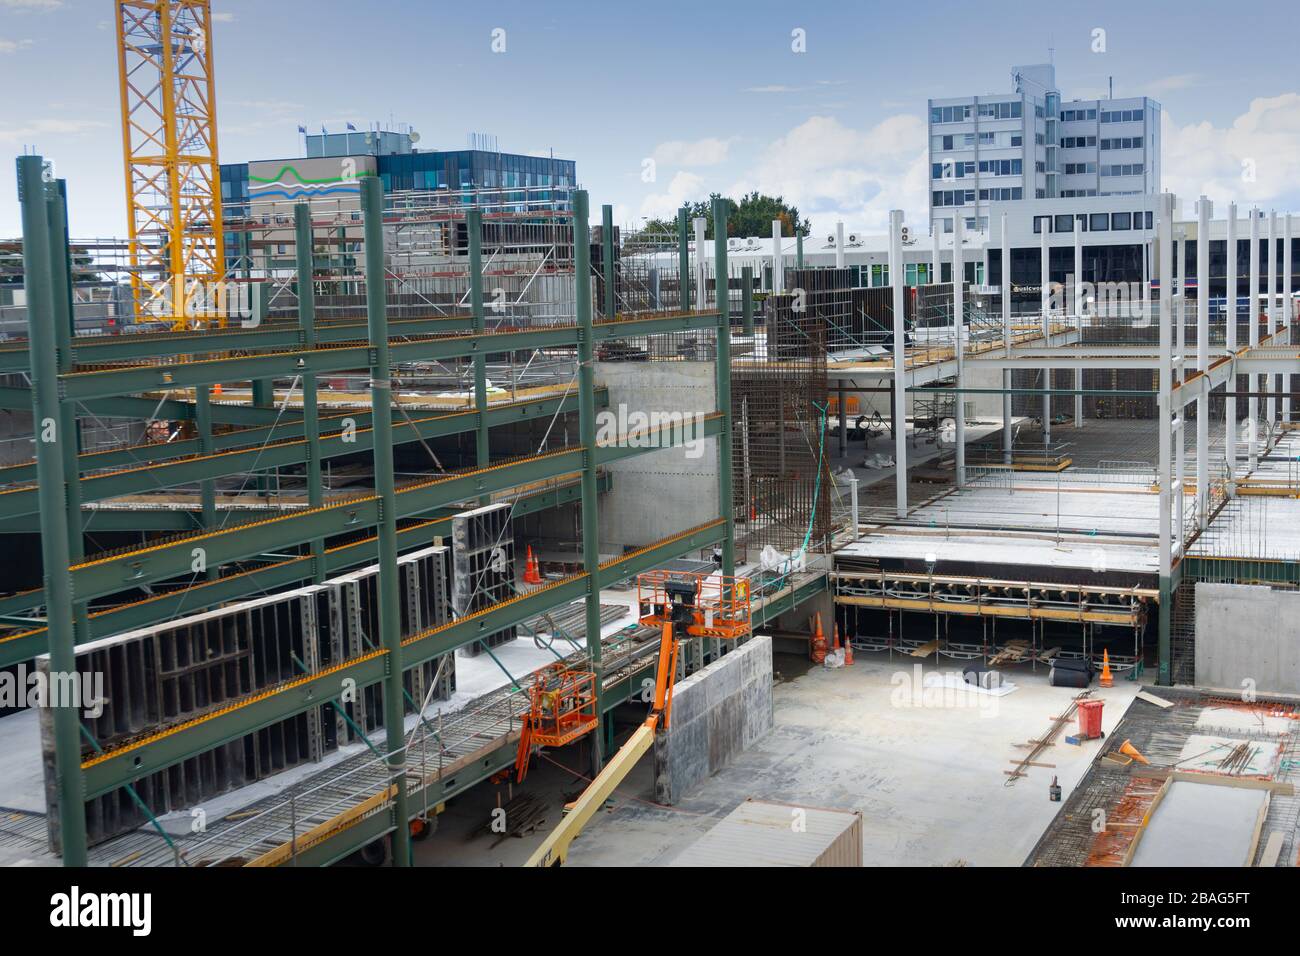 Tauranga New Zealand - March 27 2020; City construction site deserted of workers during covid-19 pandemic crisis with equipment and partly built build Stock Photo